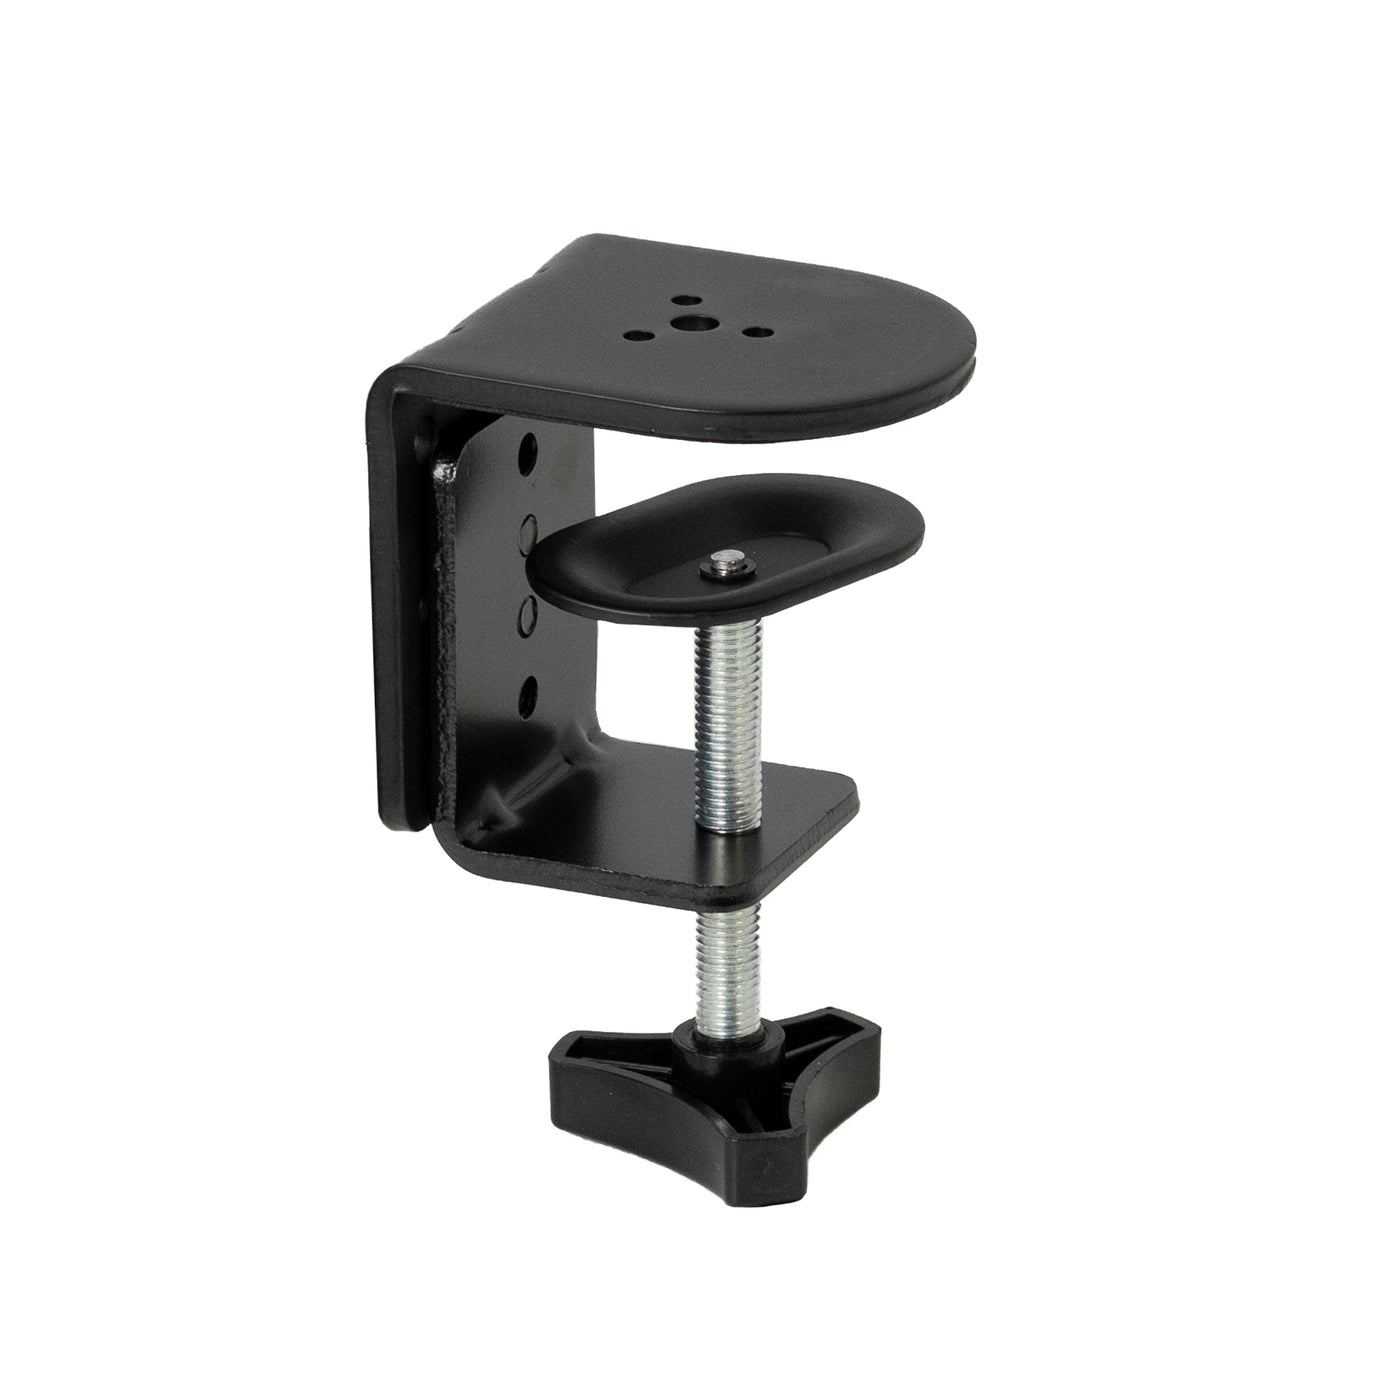 Sturdy C-clamp for desk mounts.